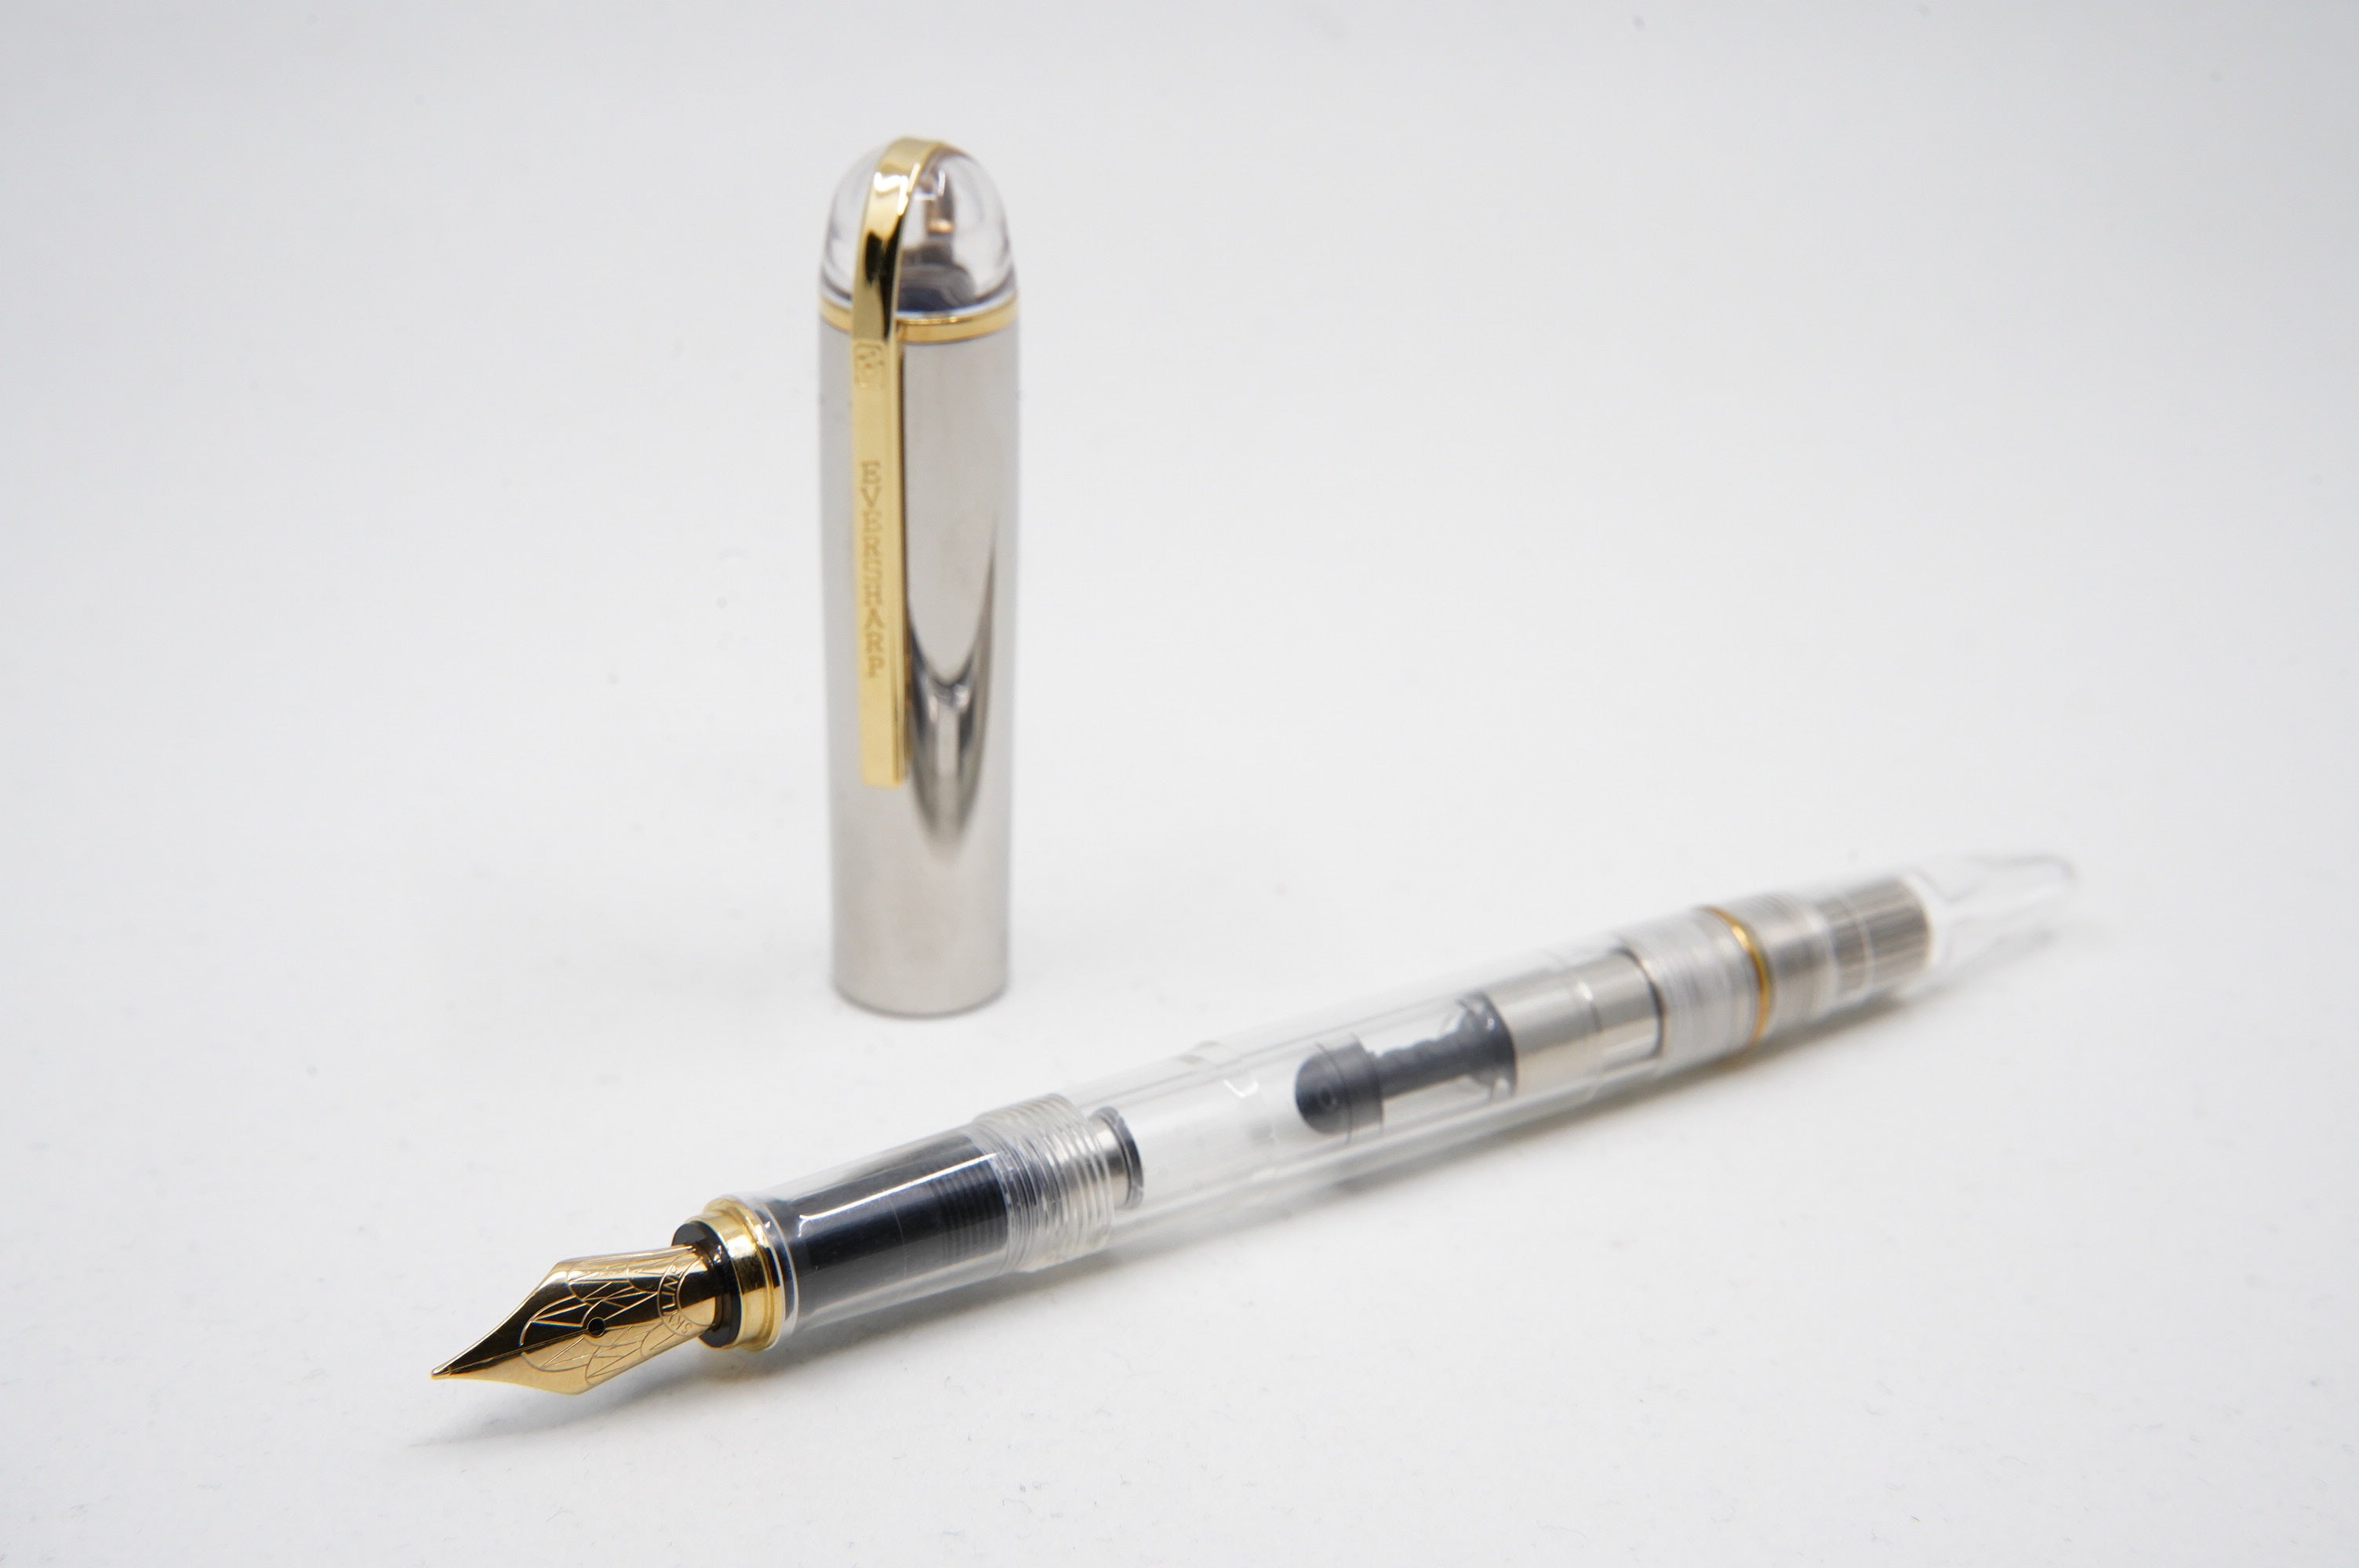 Wahl Eversharp Skyline FP Clear Demo - The iconic SKYLINE created by Henry Dreyfus in 1939